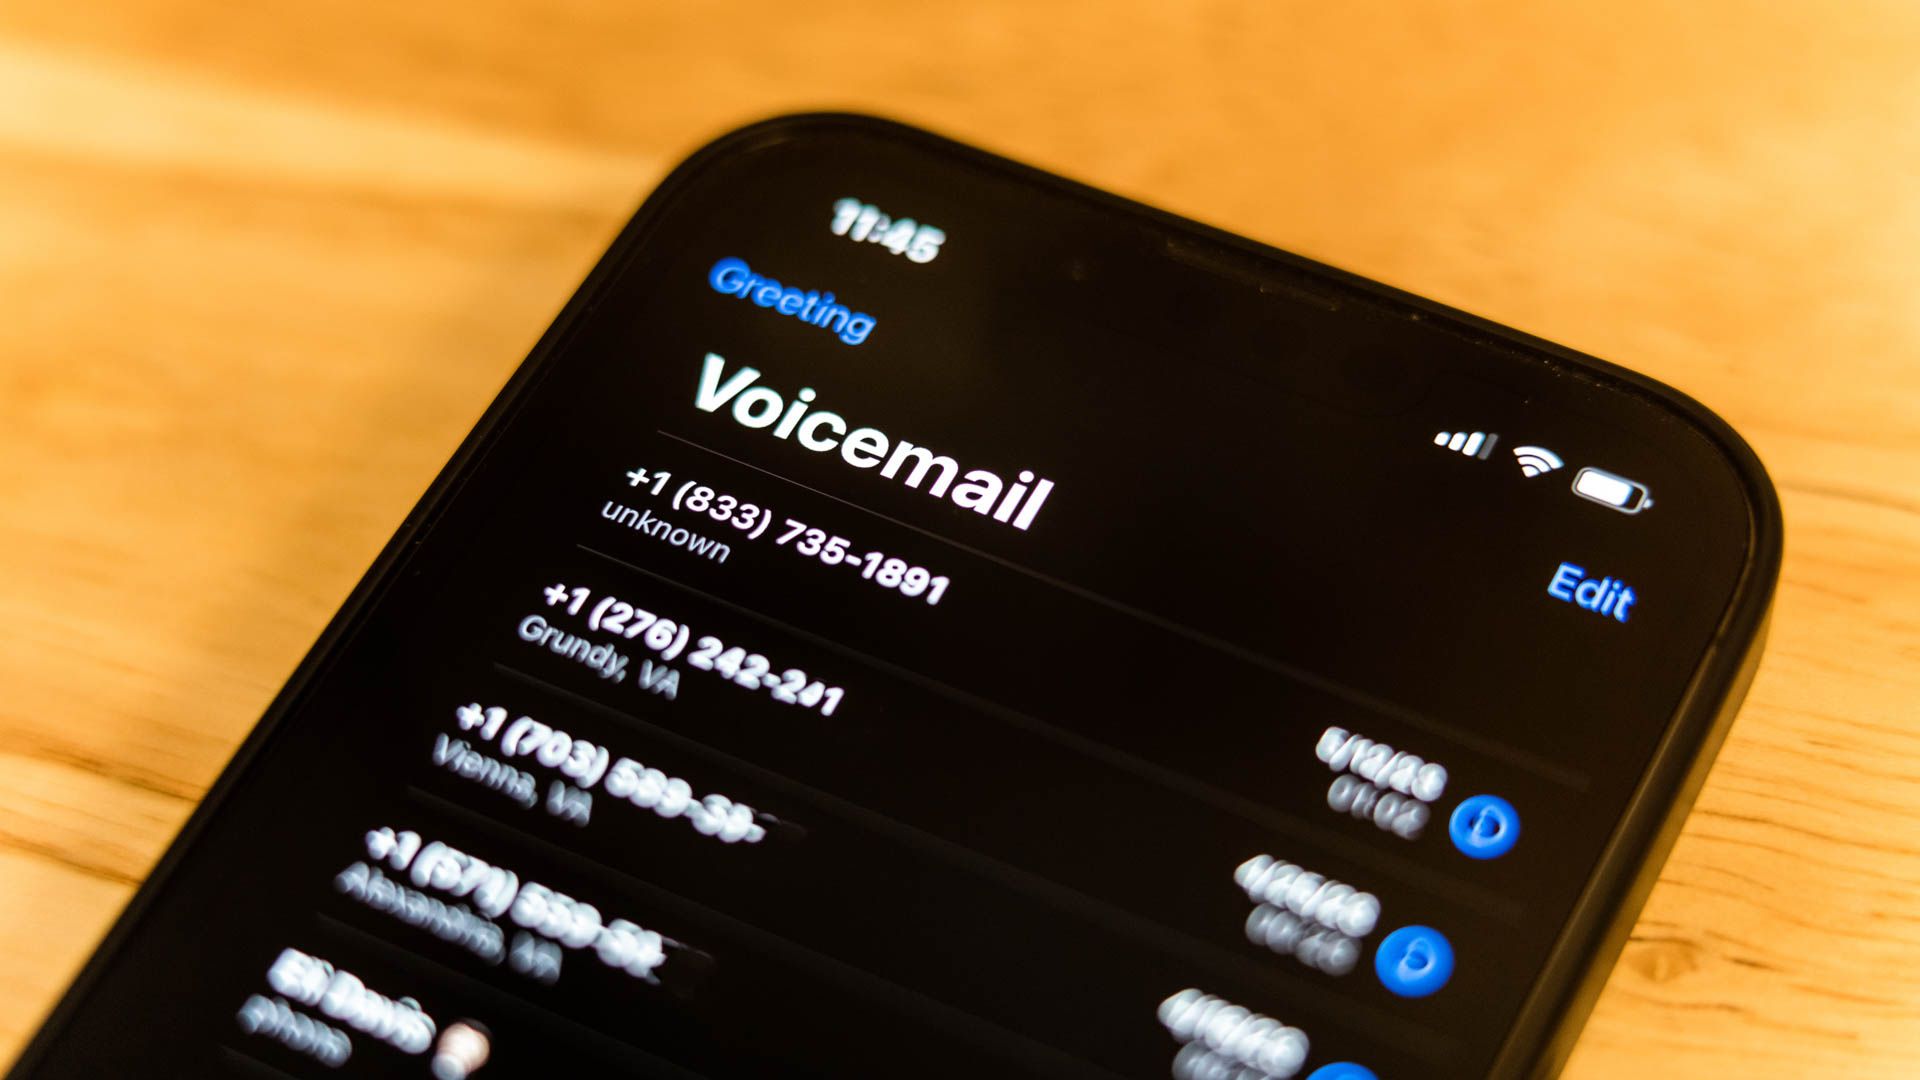 The VoiceMail app on an iPhone